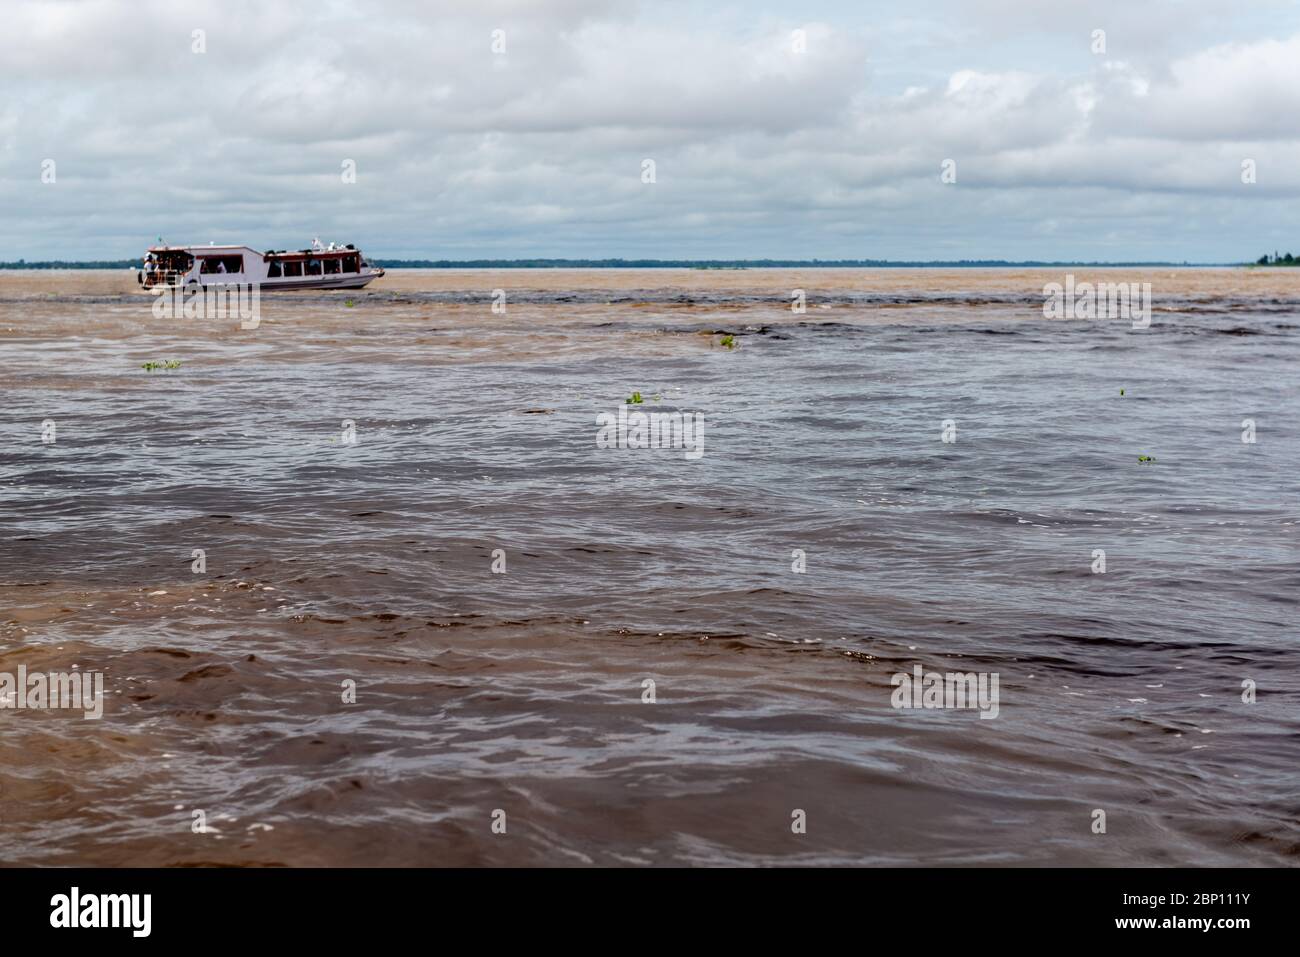 Speed boat with tourists watching the Encontro das águas, the meeting of the waters, Amzon River, Manaus, Amazon State, Brazil, Latin America Stock Photo